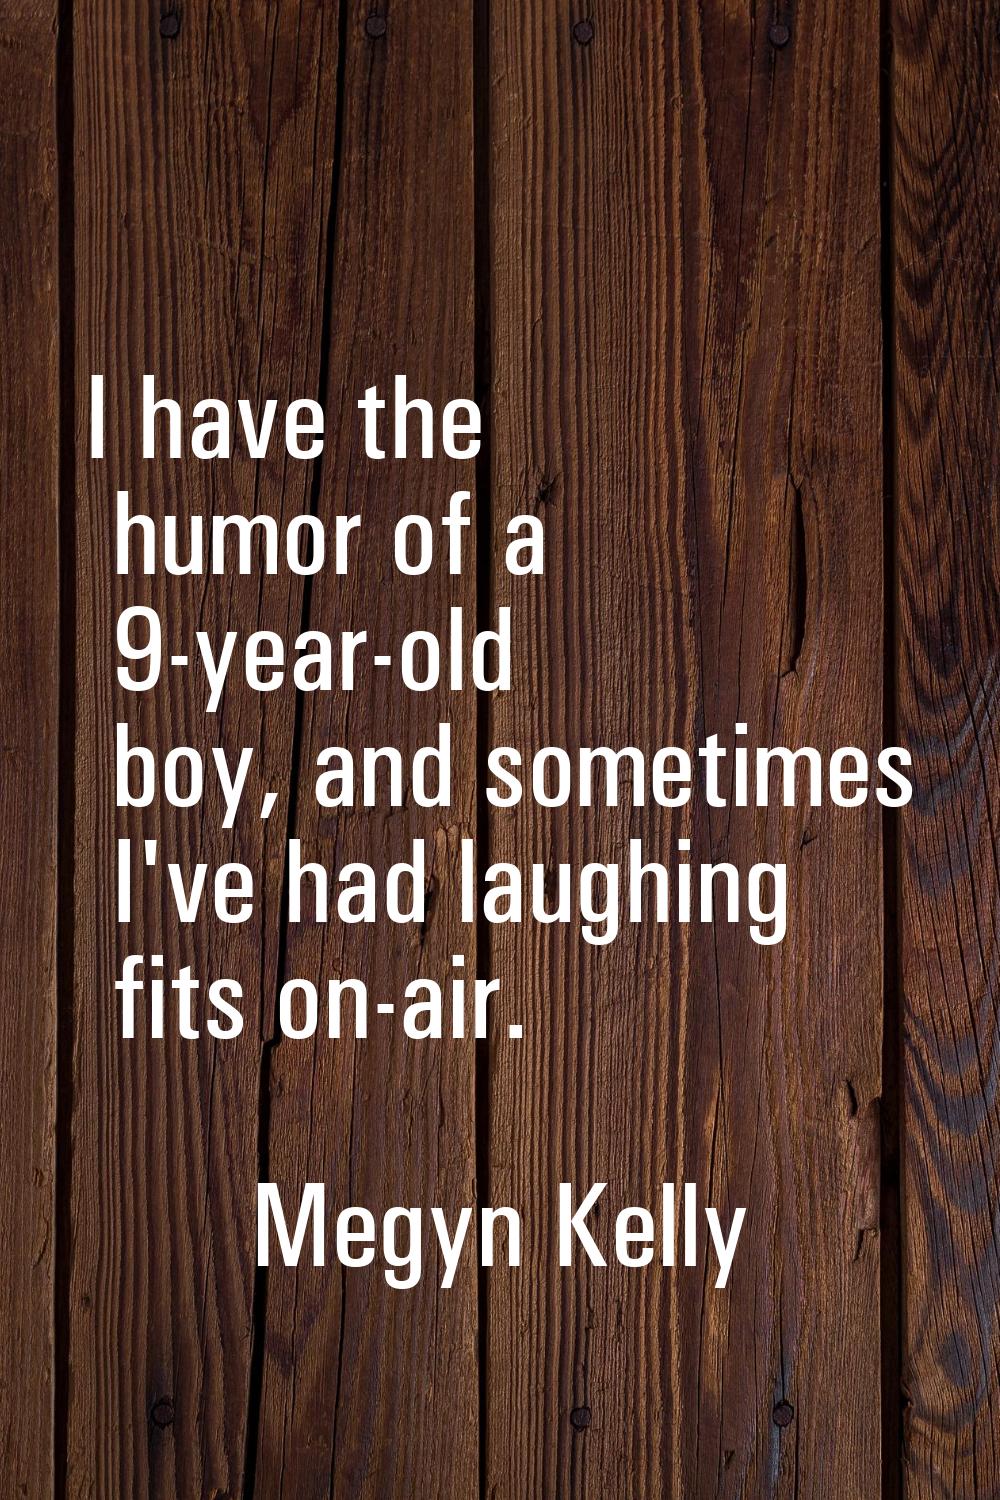 I have the humor of a 9-year-old boy, and sometimes I've had laughing fits on-air.